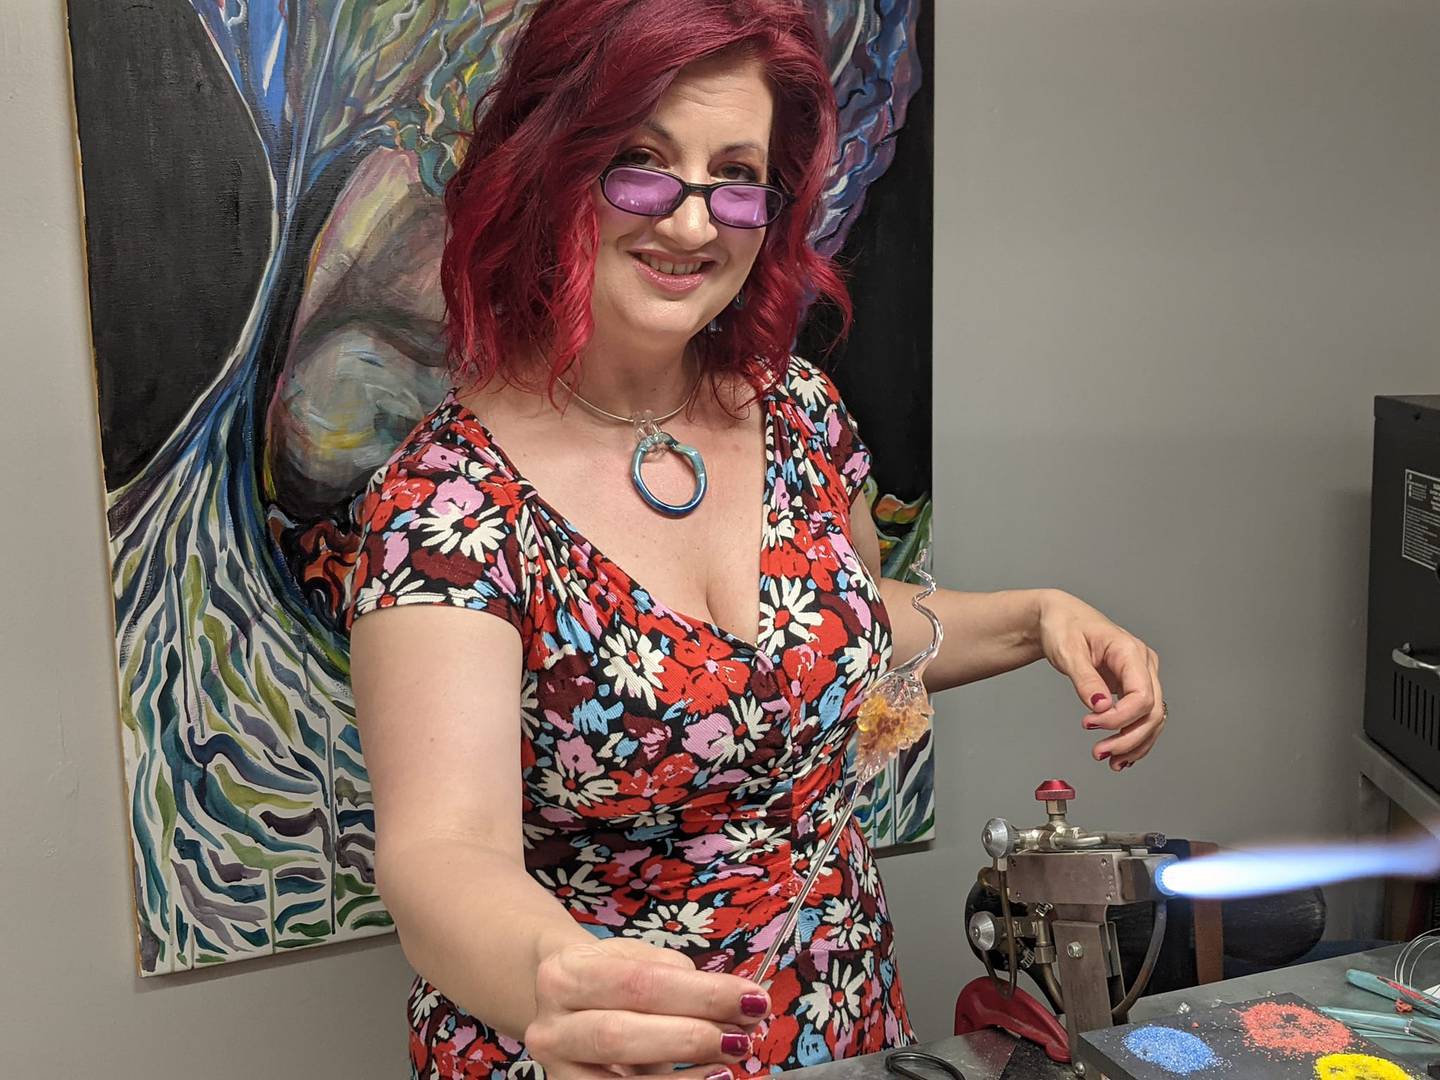 Victoria Belz demonstrated how she makes her flameworked glass art, jewelry and gifts during a grand opening held over the weekend for her new store and studio, Tinker Belz Art, located in The Berry House at 227 S. Third Street, Suite 108, in downtown Geneva.